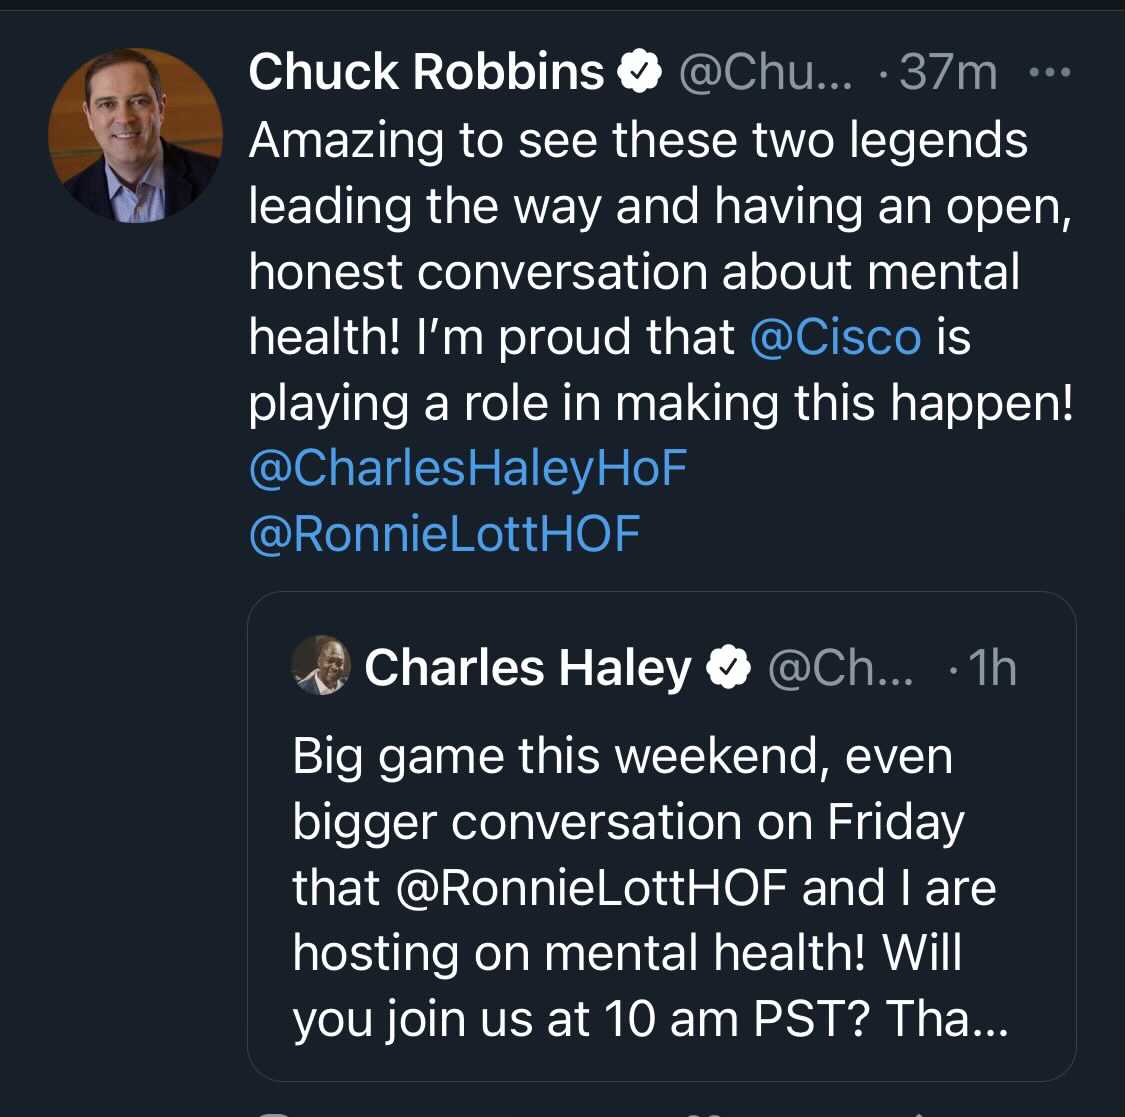 Thank you for the support, @ChuckRobbins